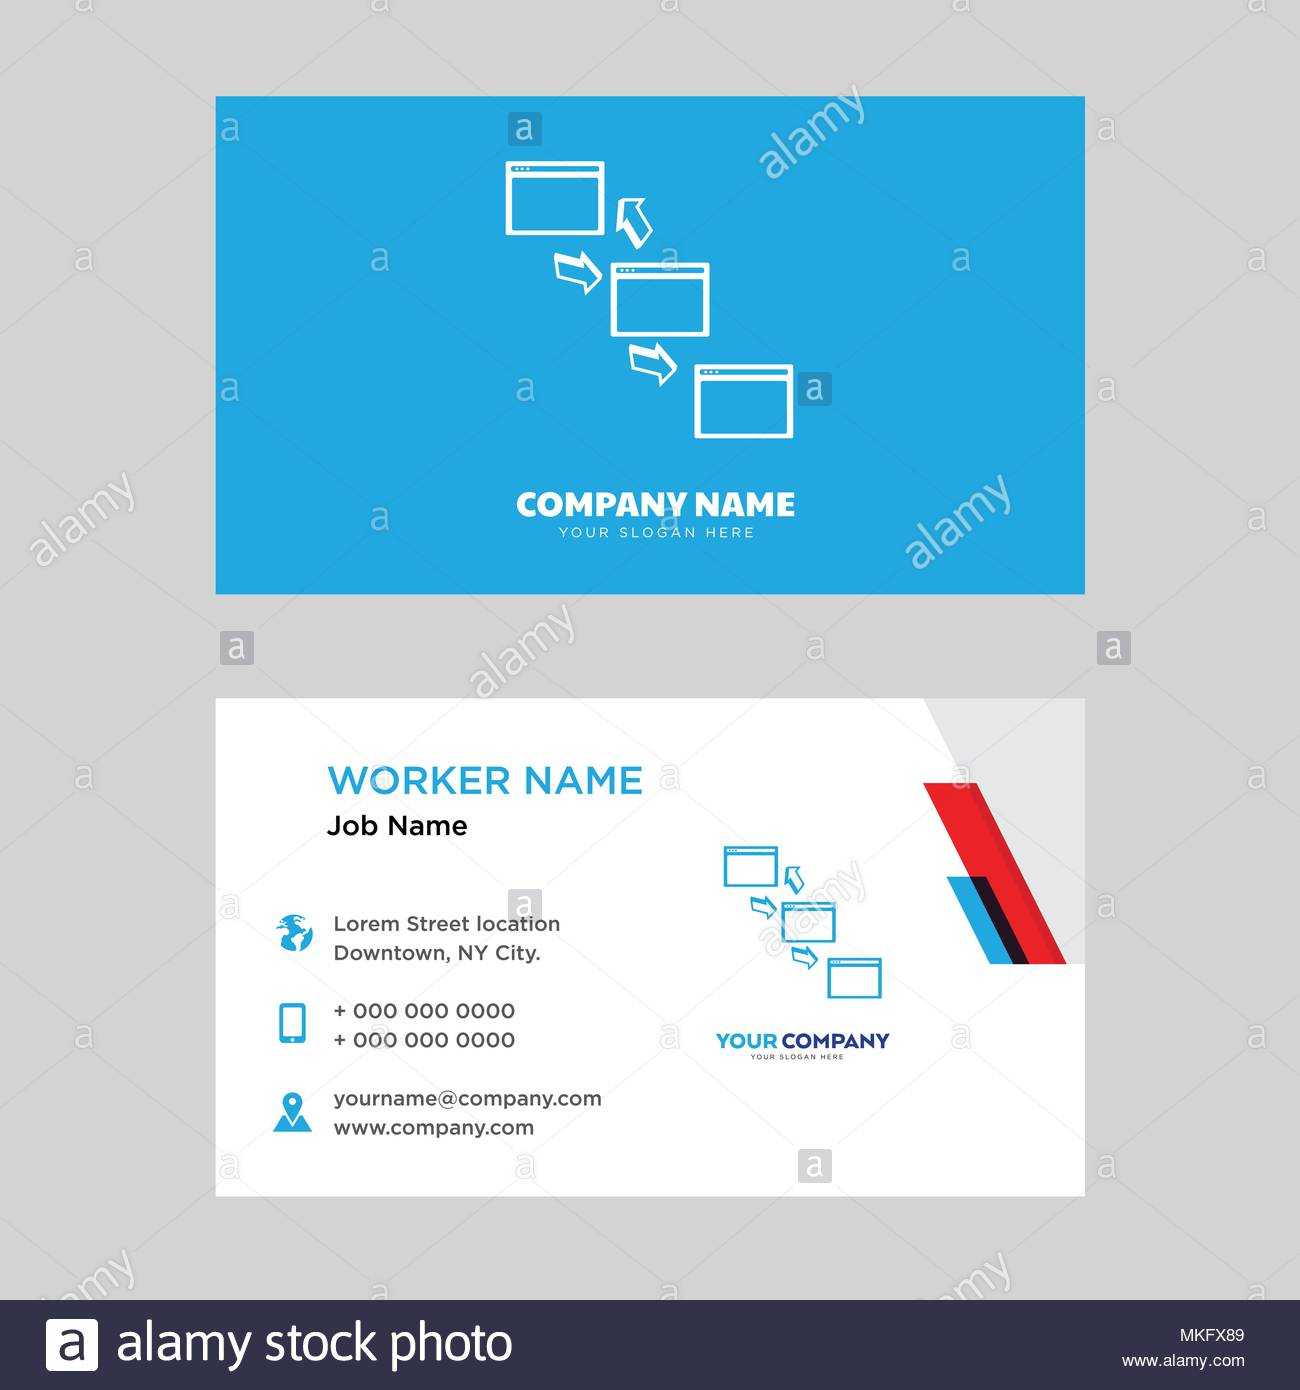 Networking Business Card Design Template, Visiting For Your For Networking Card Template